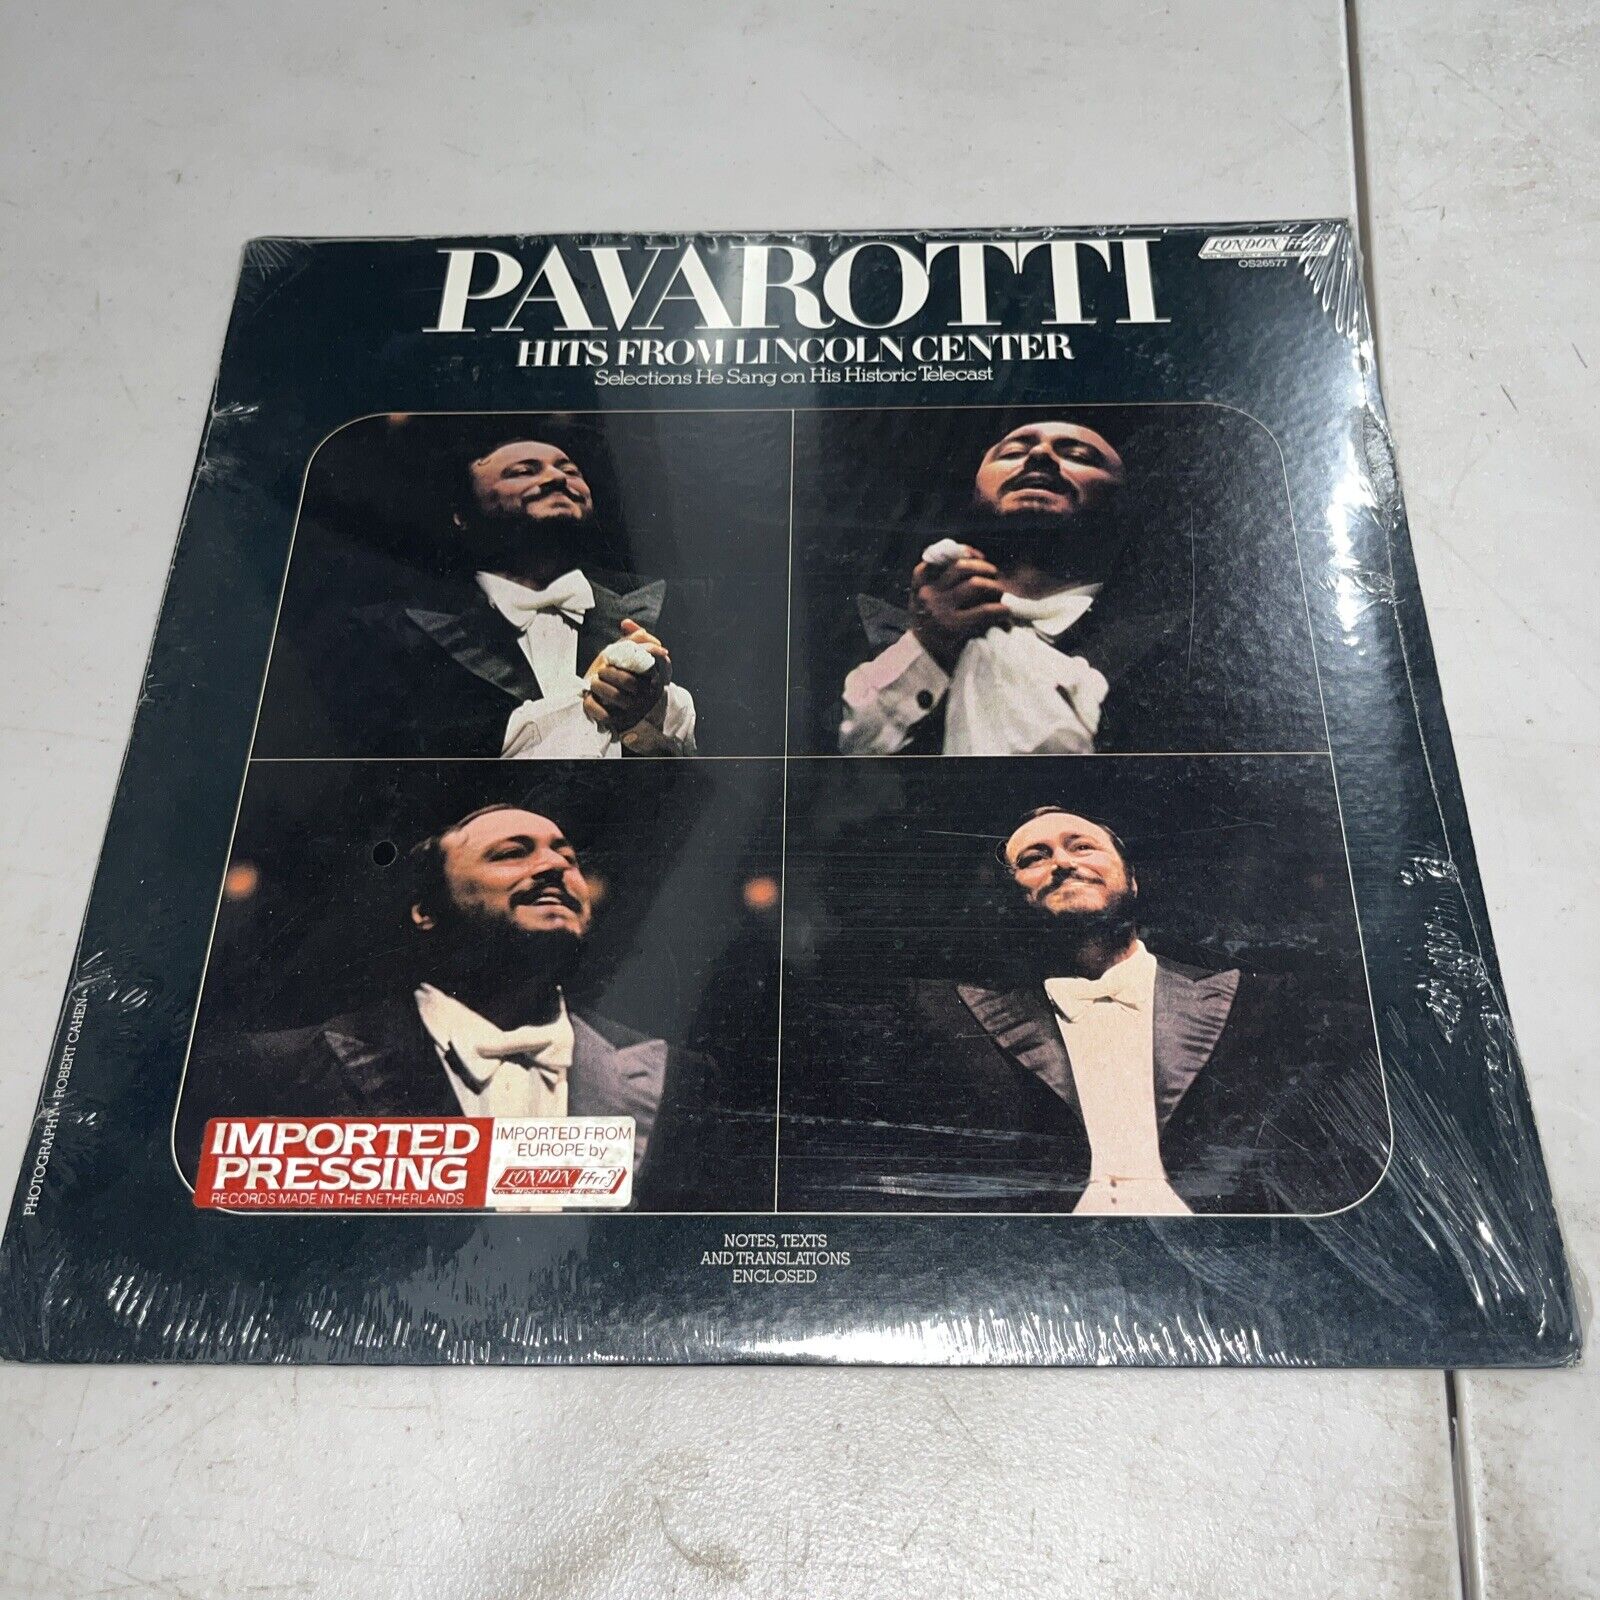 luciano pavarotti hits from lincoln center Vinyl, New, Sealed 